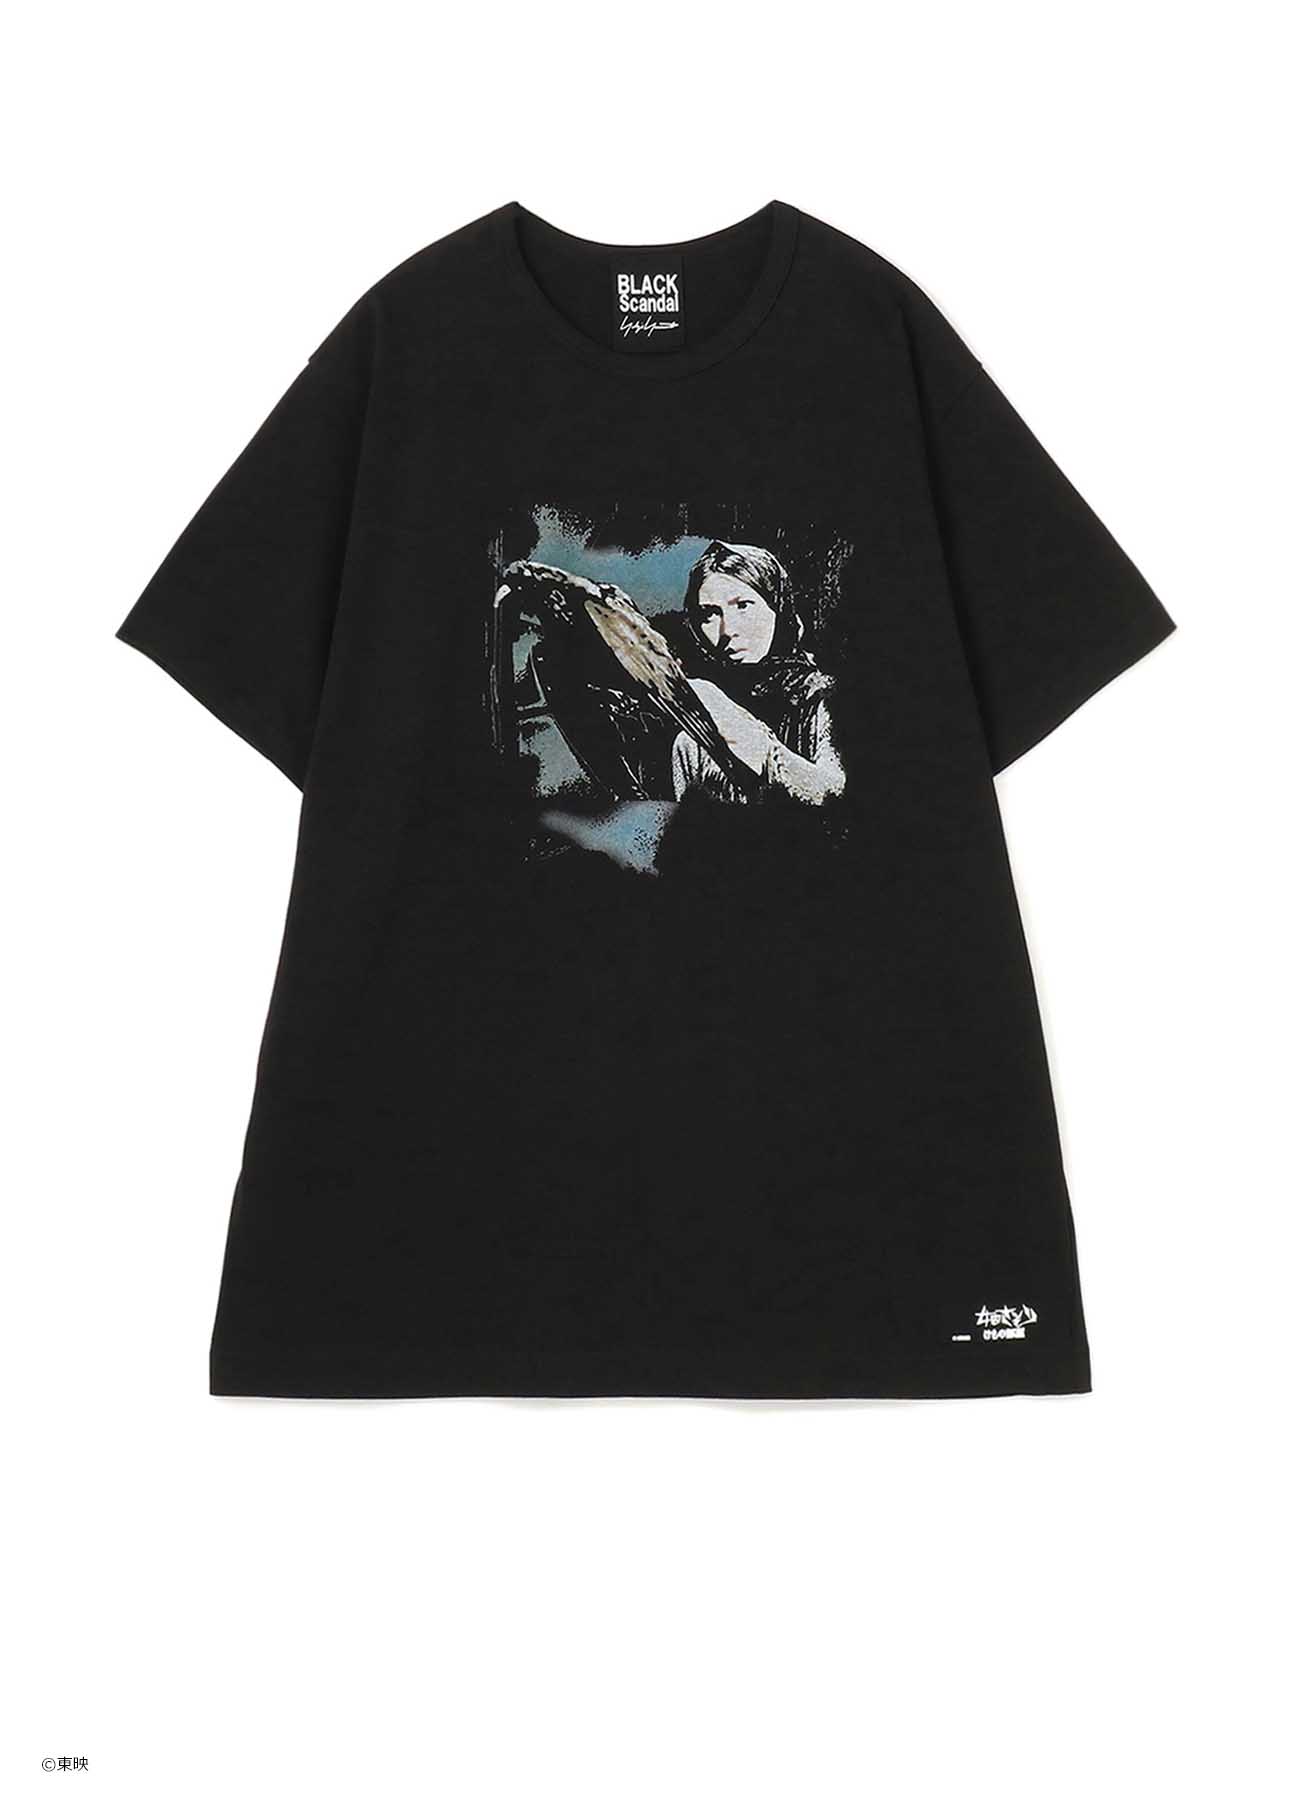 【5/24 10:00(JST) Release】FEMALE CONVICT: DEN OF BEAST SHORT SLEEVES CUT SEWN